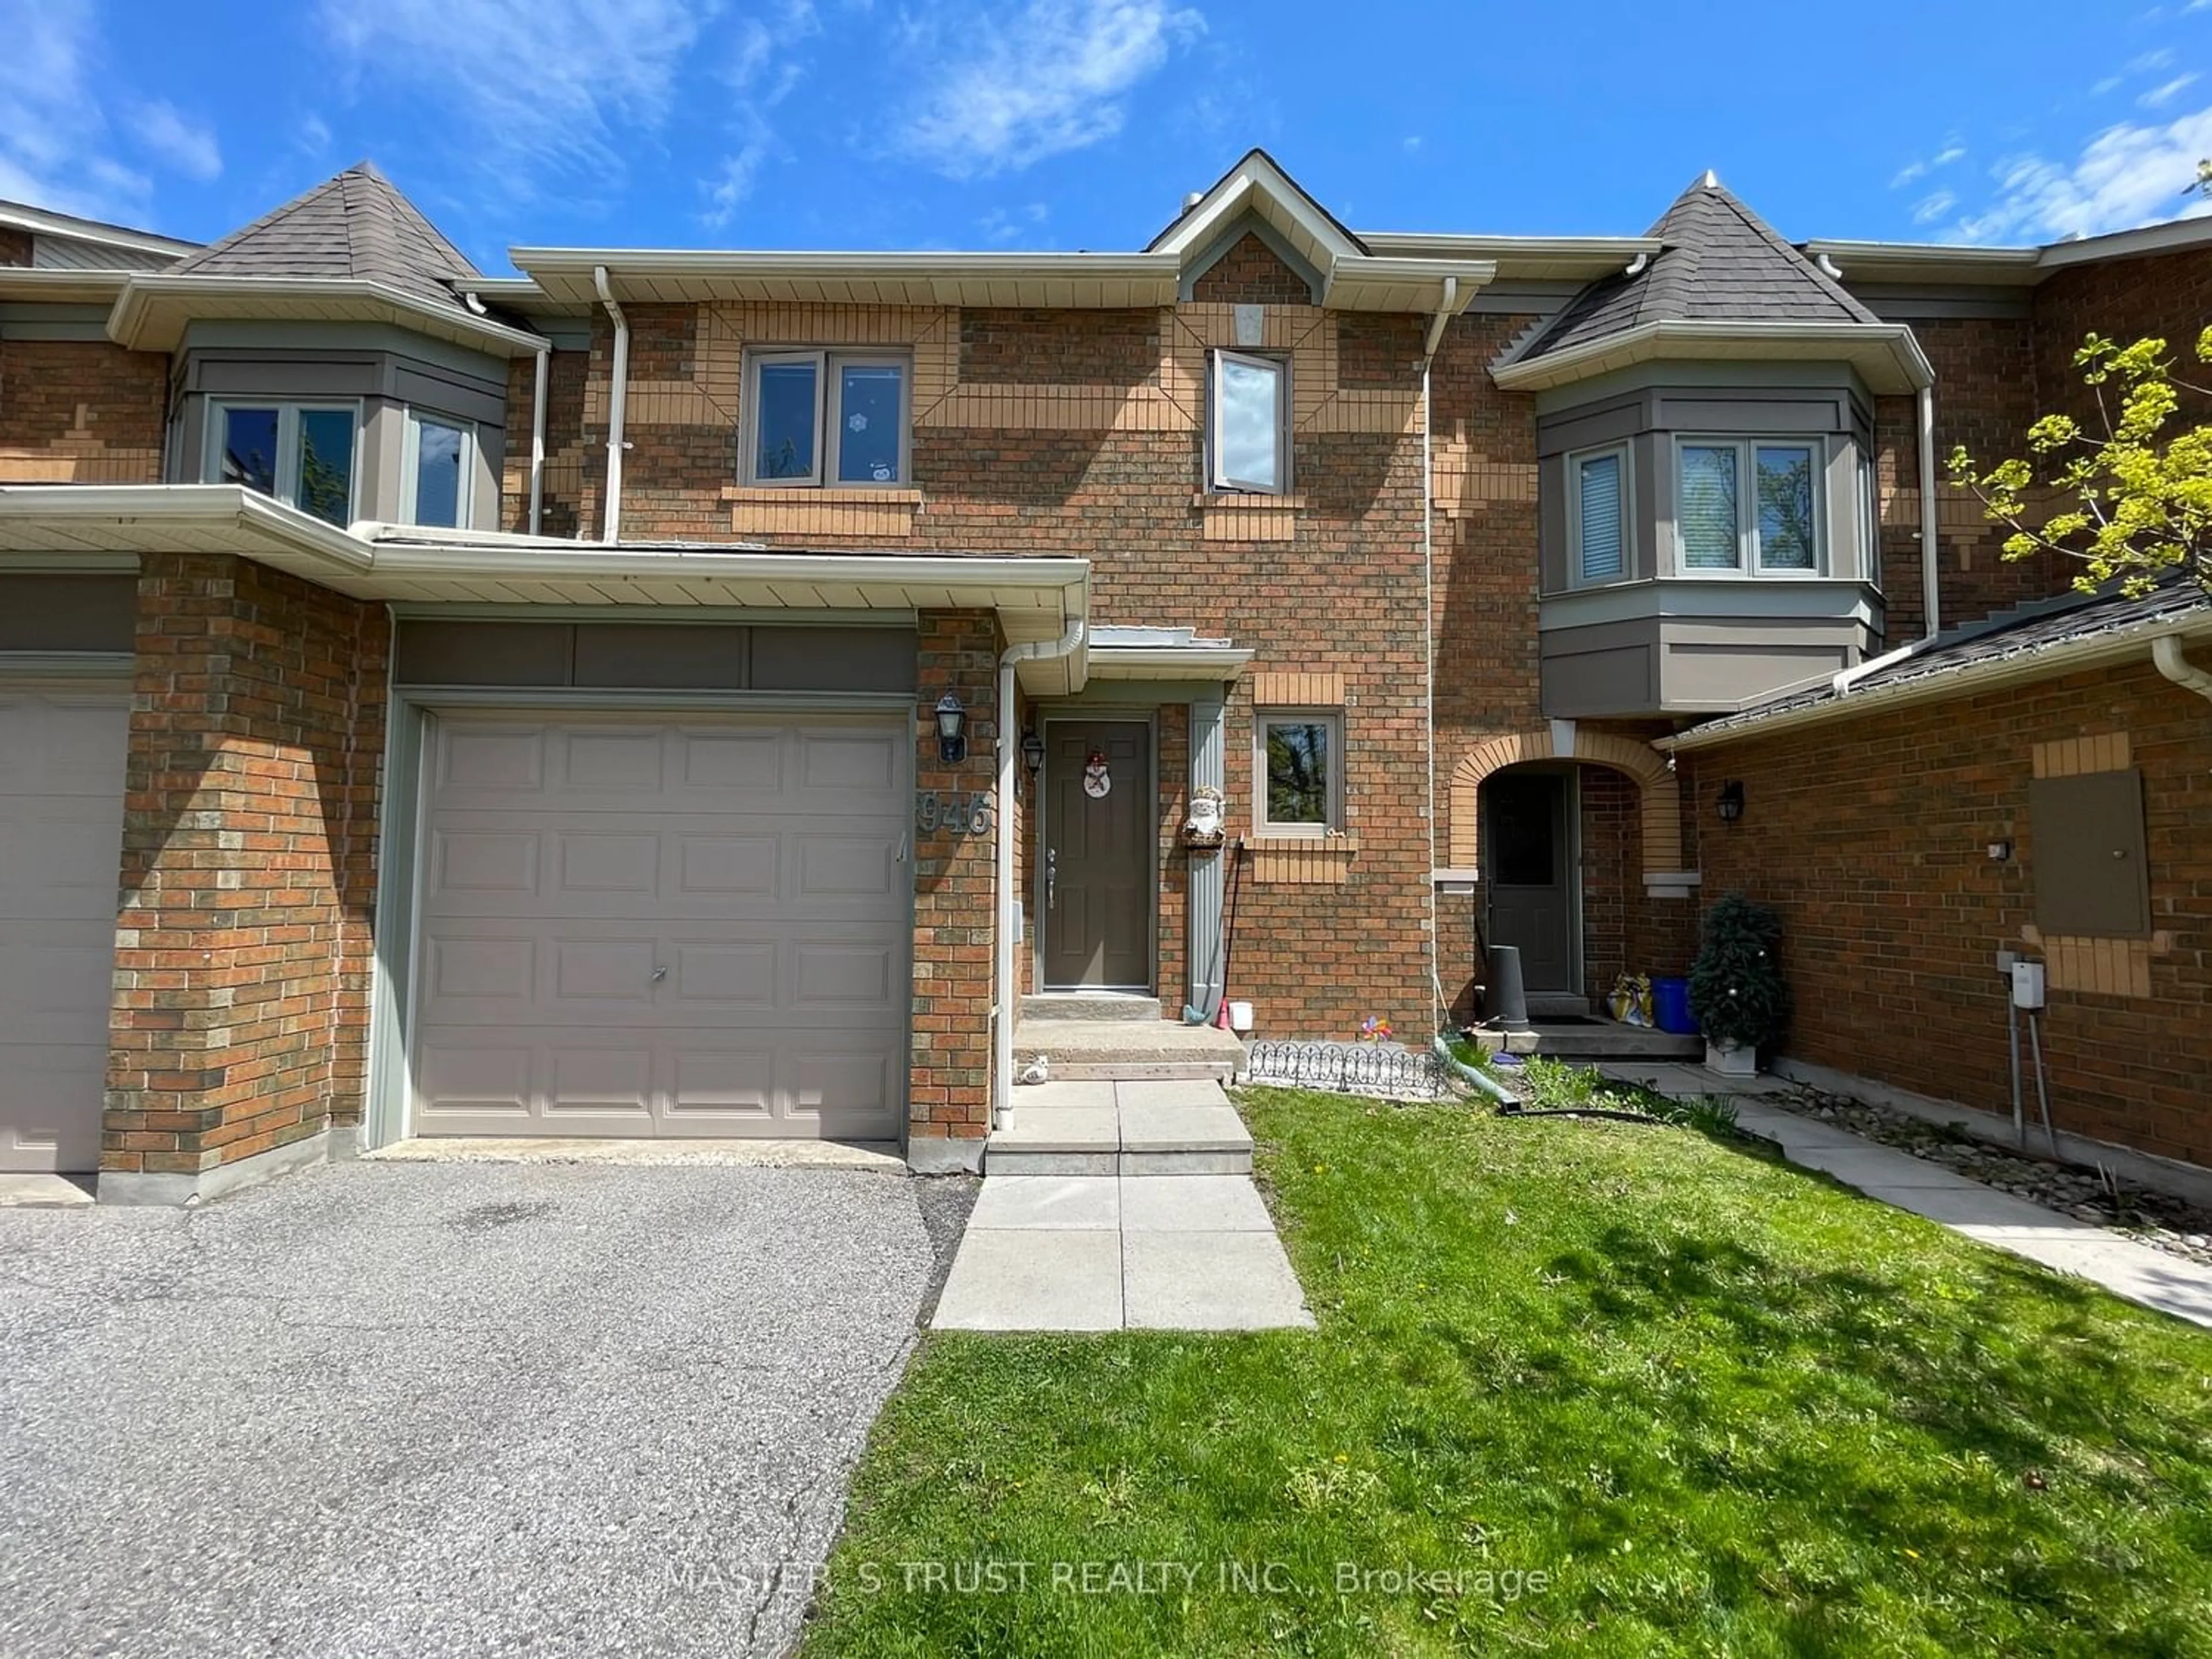 Home with brick exterior material for 946 Caribou Valley Circ, Newmarket Ontario L3X 1X1